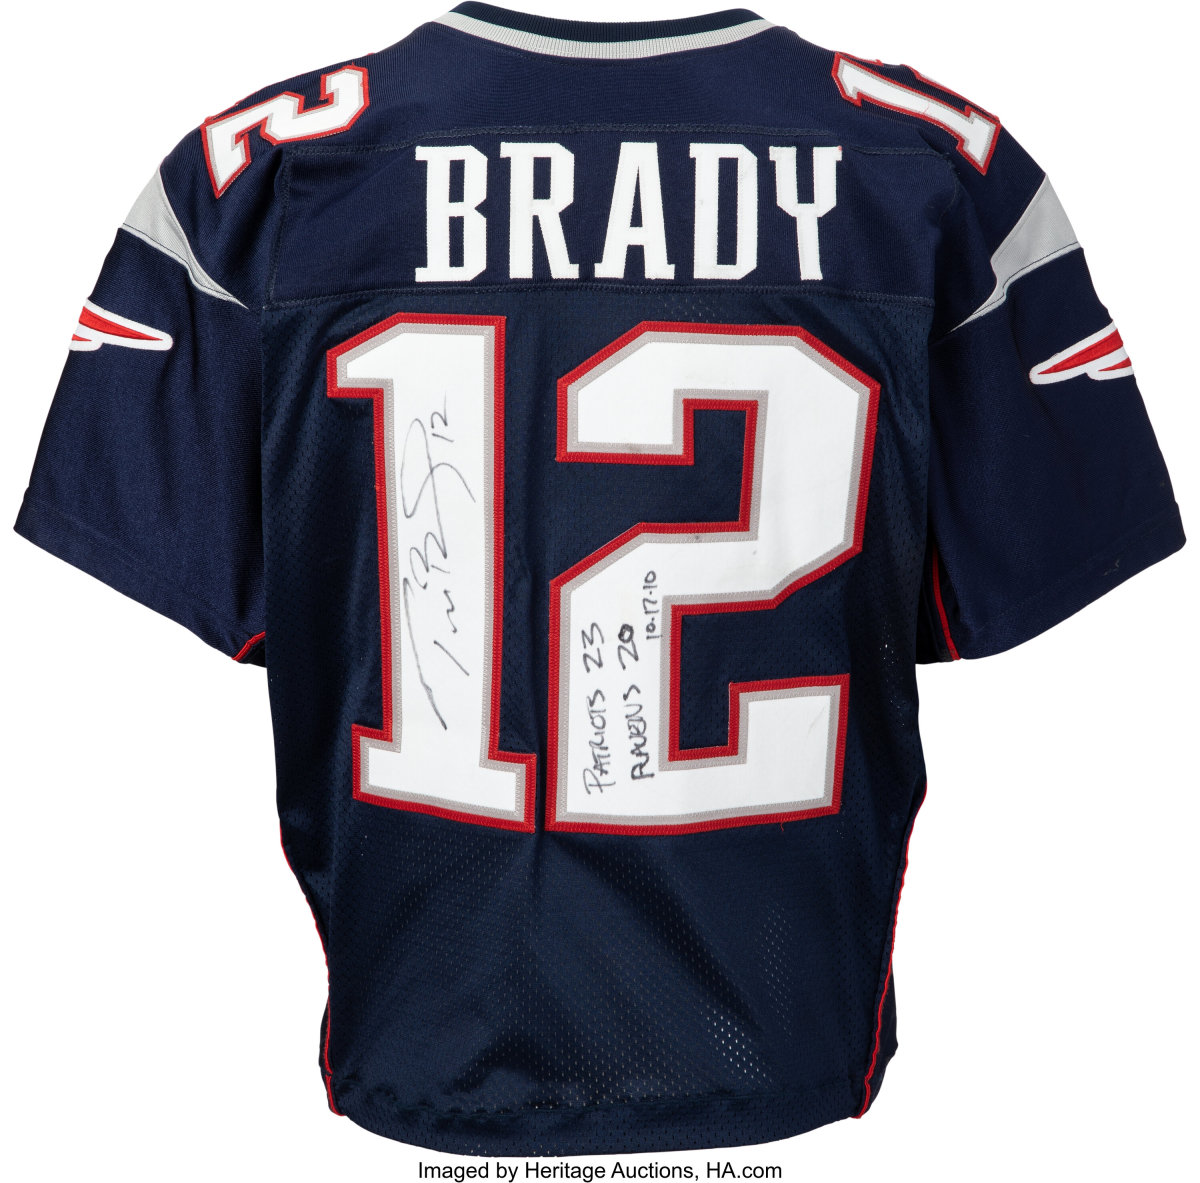 Tom Brady Autographed Game-Used Jersey an NFL Auctions Fundraiser